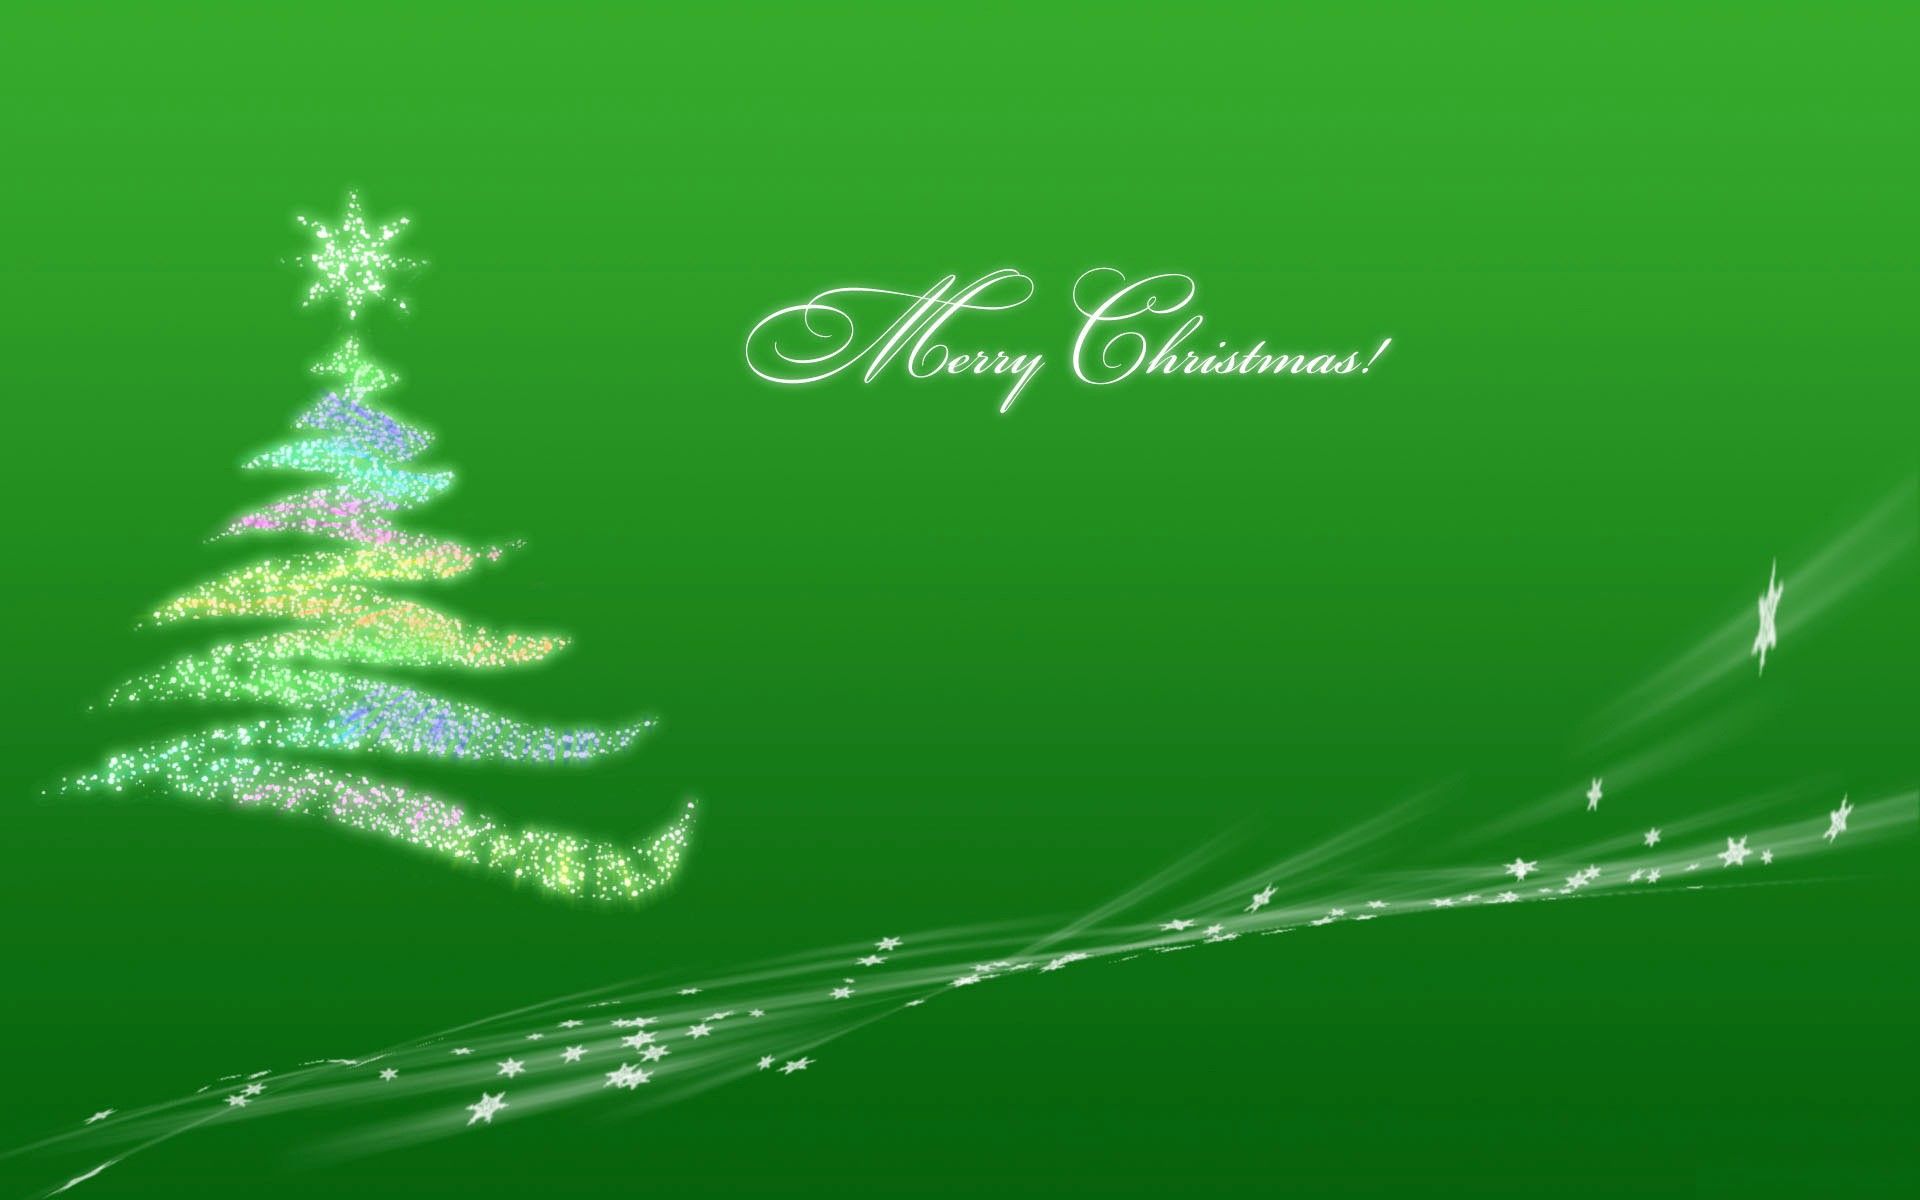 Merry Christmas Green Wallpaper on Christmas Holiday Free Download